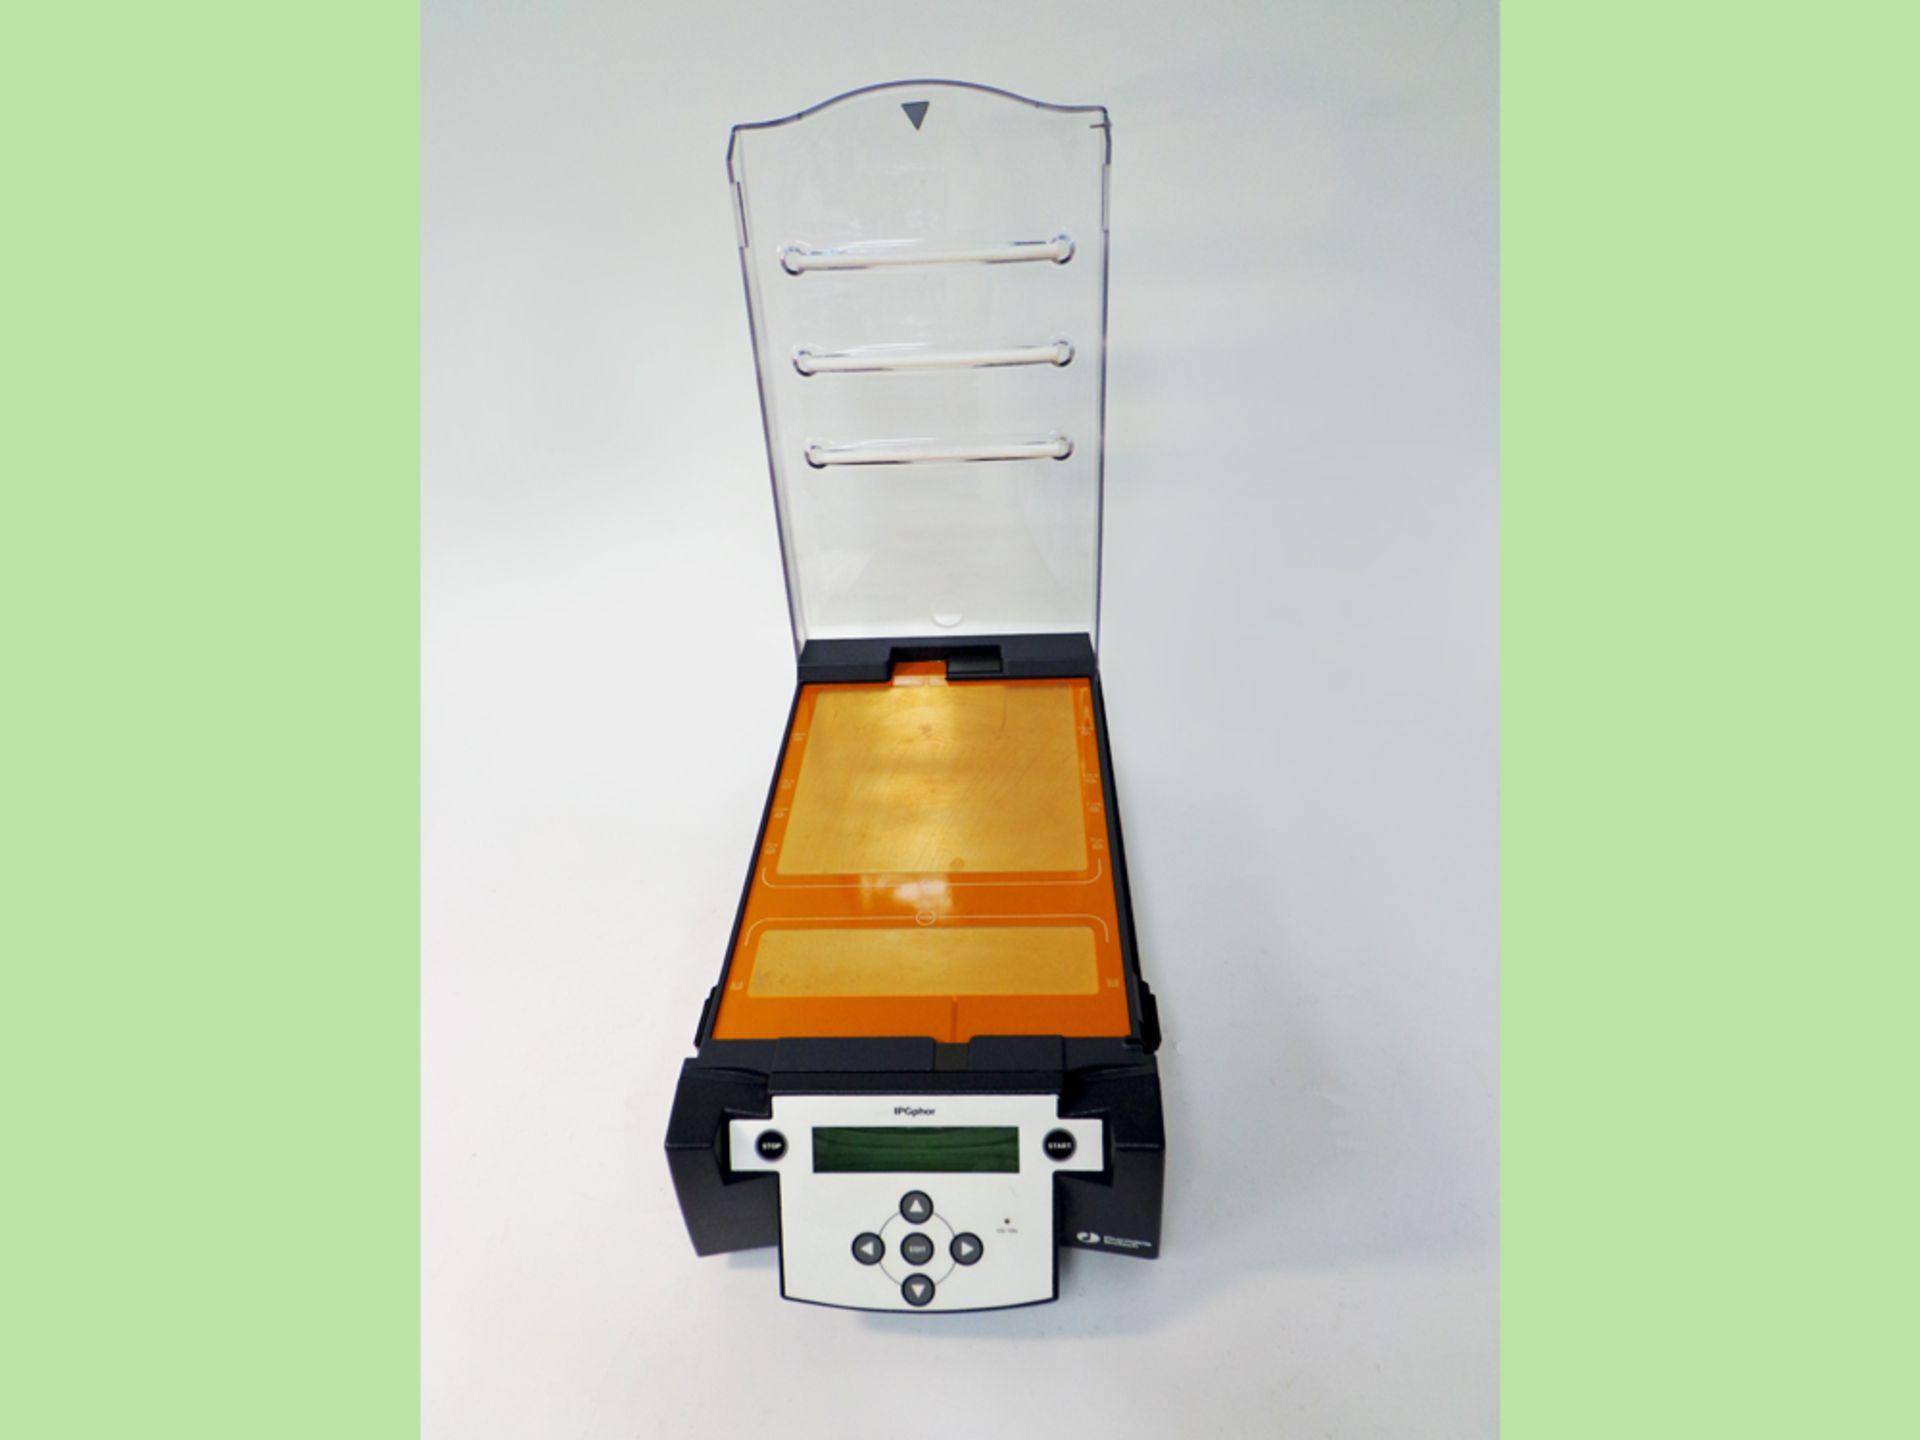 Amersham Pharmacia Biotech IPGphor Isoelectric Focusing System Unit 80-6414-02 and Case of IPGphor - Image 8 of 11